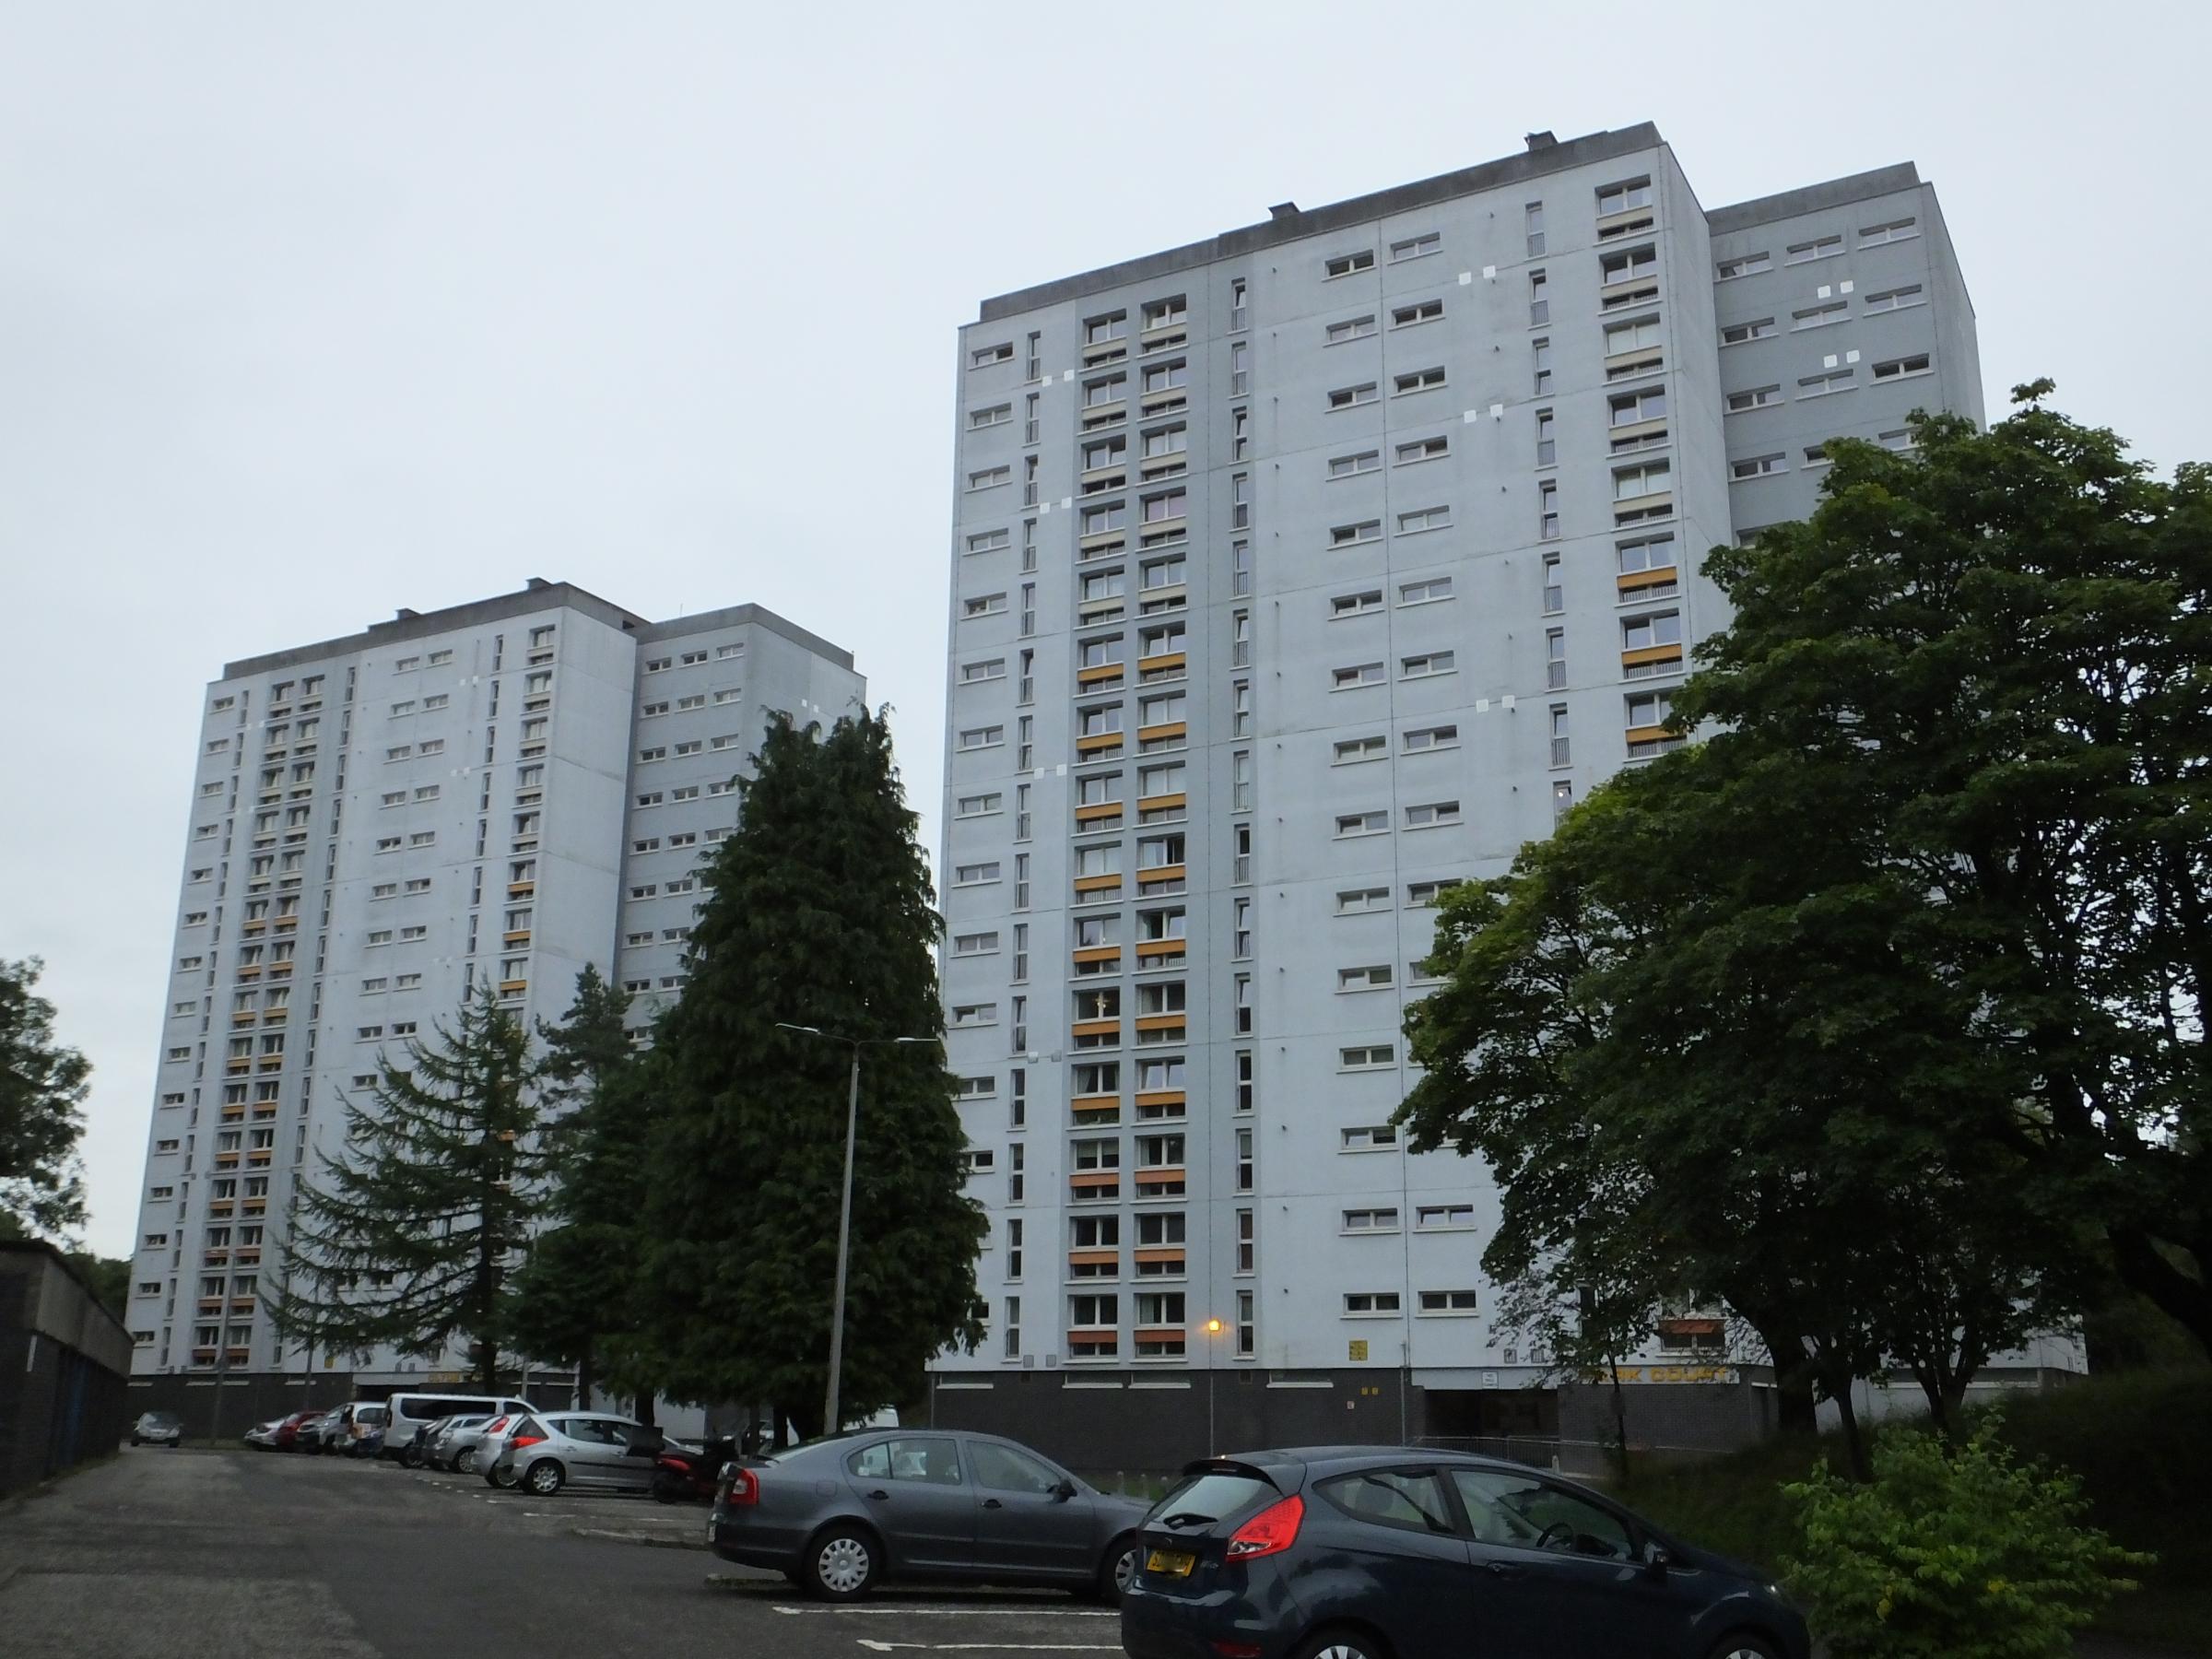 Stricter safety rules for Clydebank high rise flats in bid to protect tenants